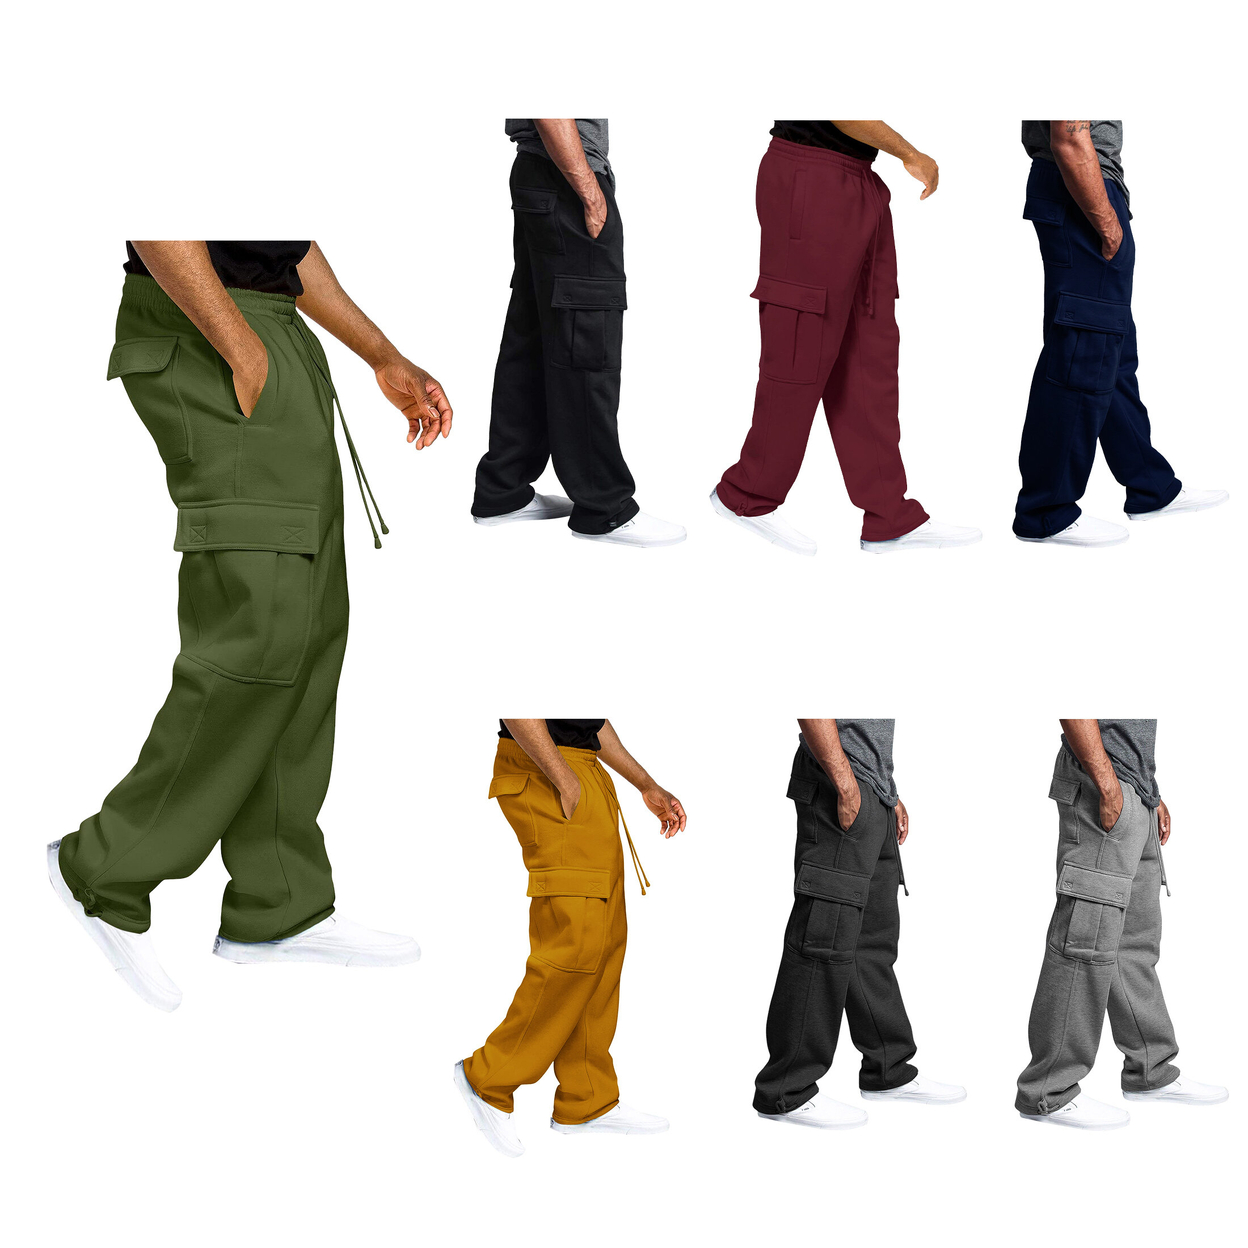 Men's Soft Casual Solid Fleece Lined Cargo Jogger Sweatpants With Pockets - Black, Xx-large